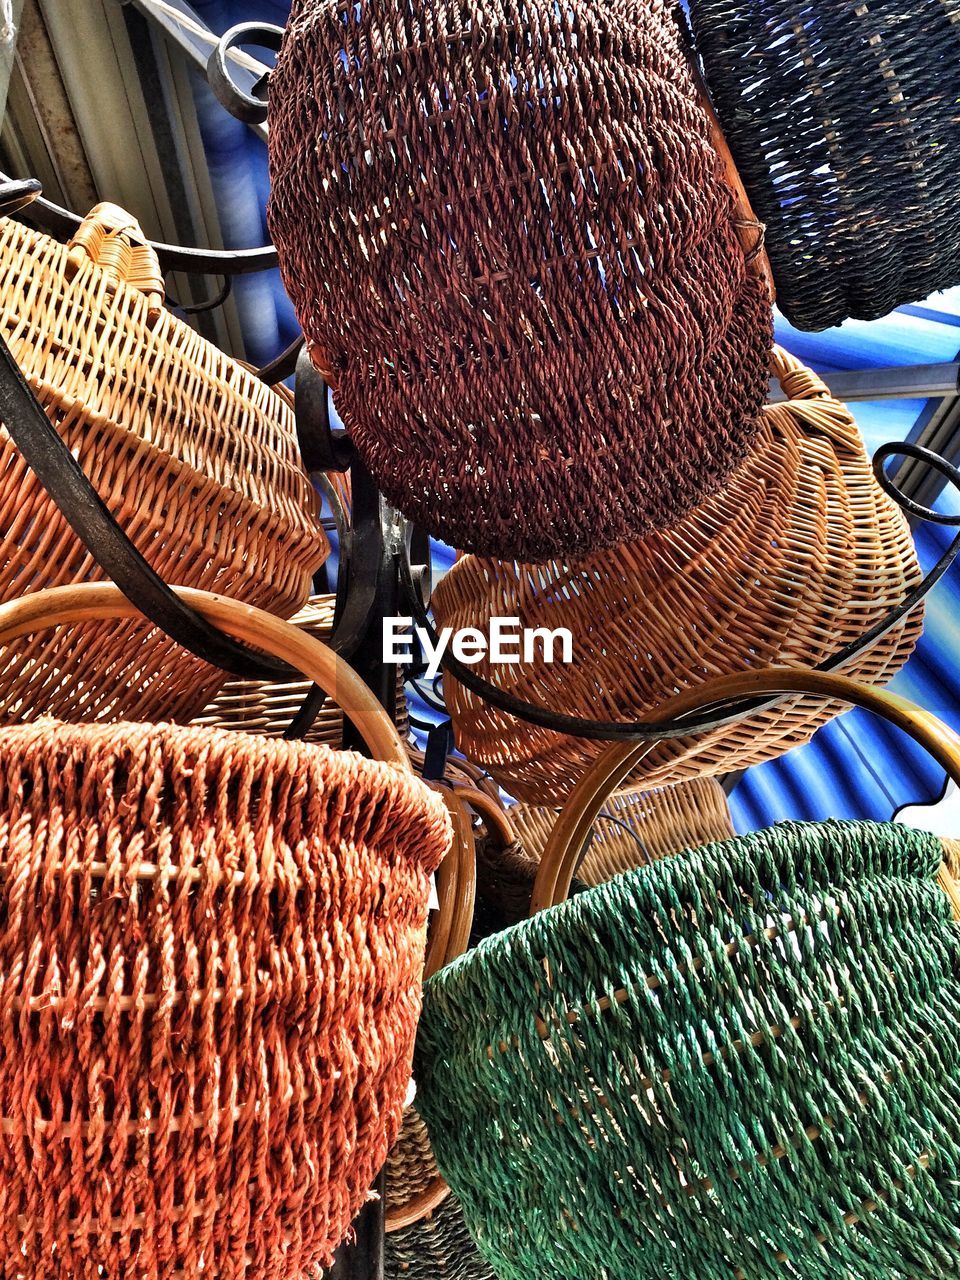 High angle view of wicker baskets for sale